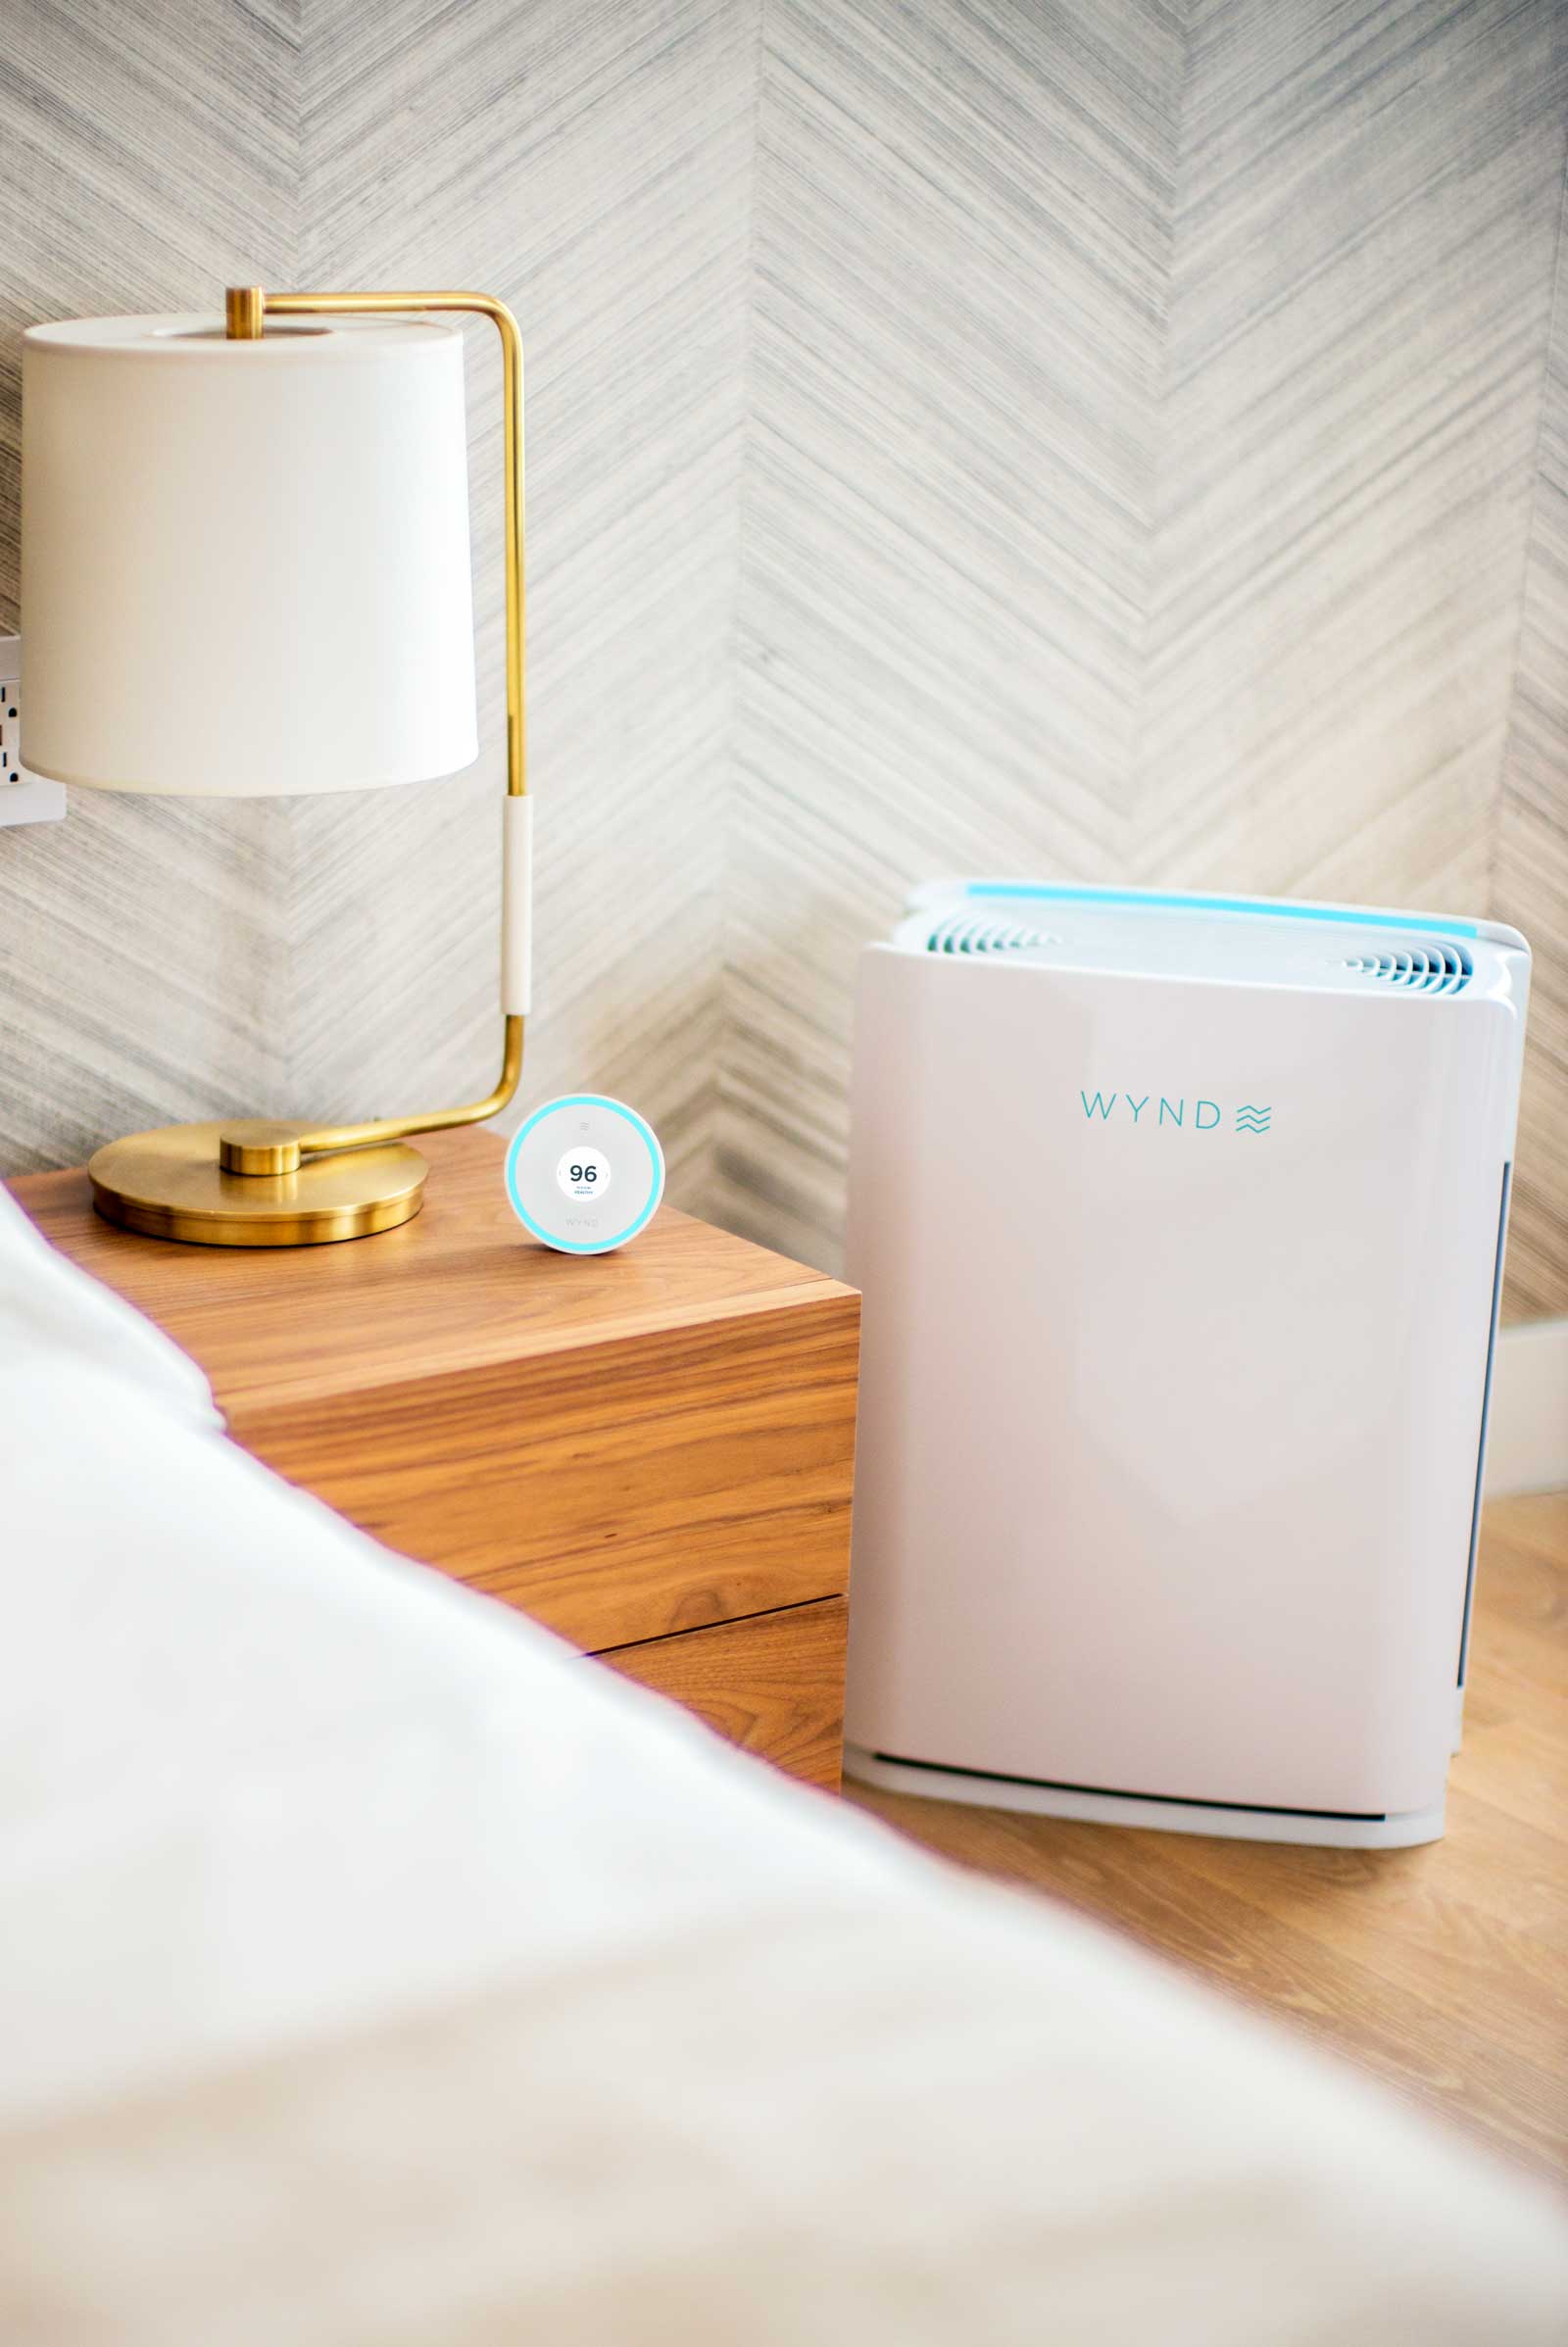 Photo of the Wynd Halo and Wynd Home Purifier next to a nightstand in a bedroom